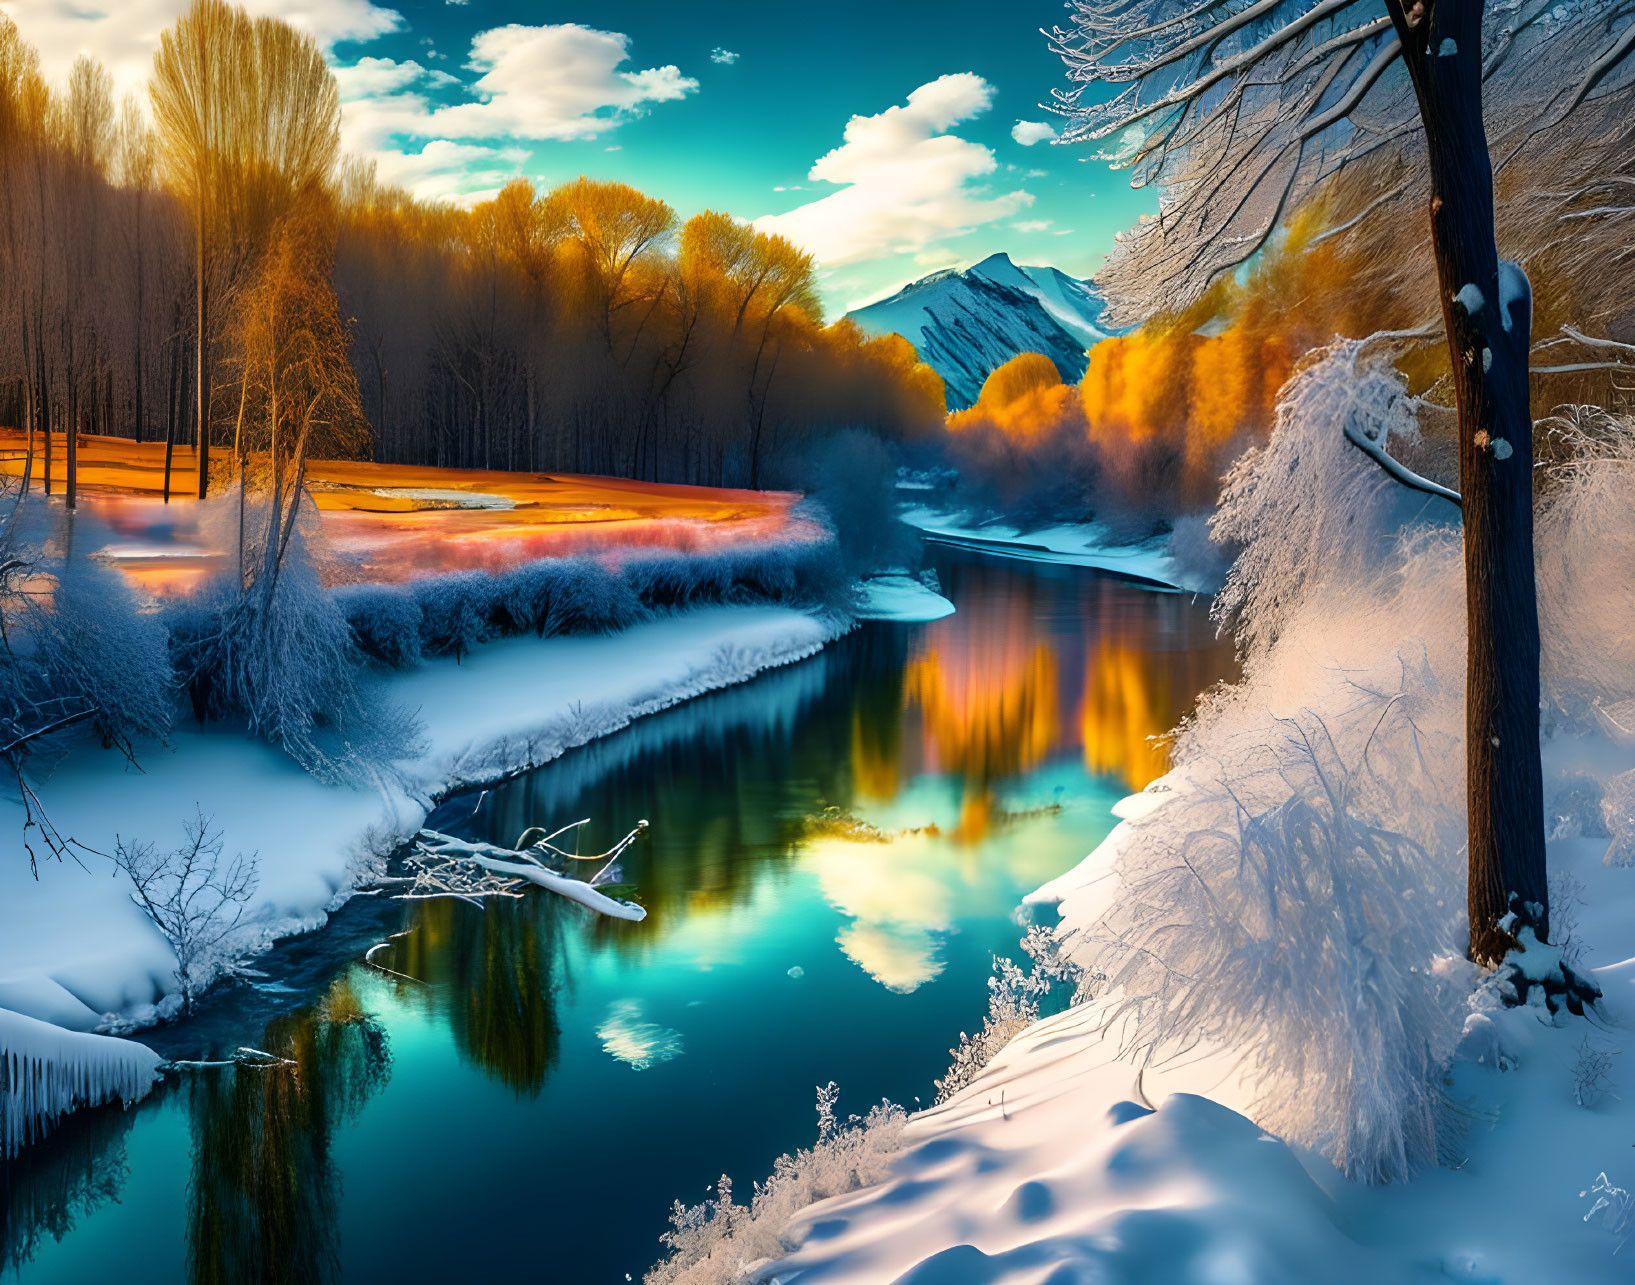 Snowy riverbank at sunset with autumn trees and distant mountain